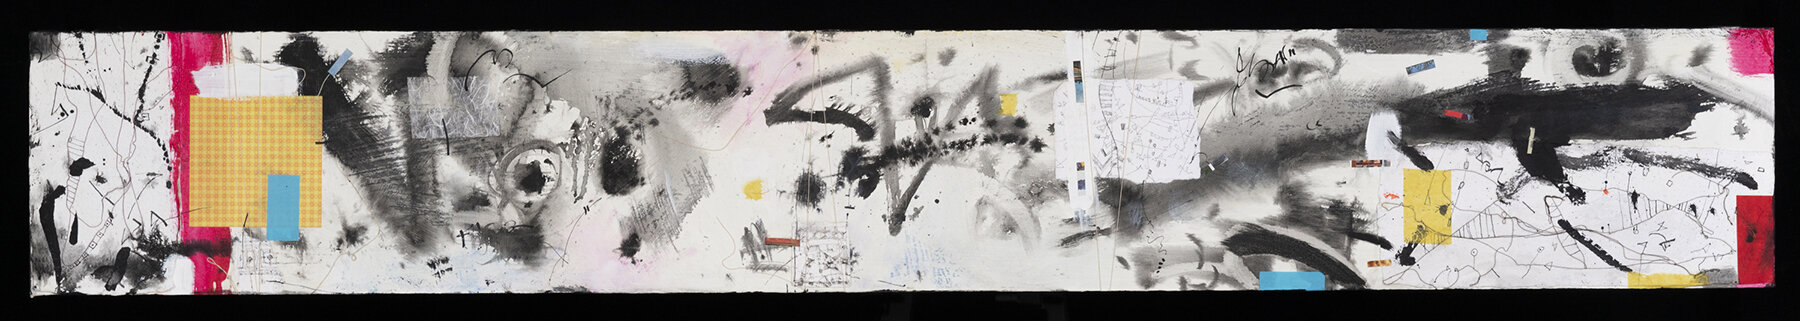  Tremaine; Acrylic, Rice paper, and Fiber on Wood panel 12x79” 2021 